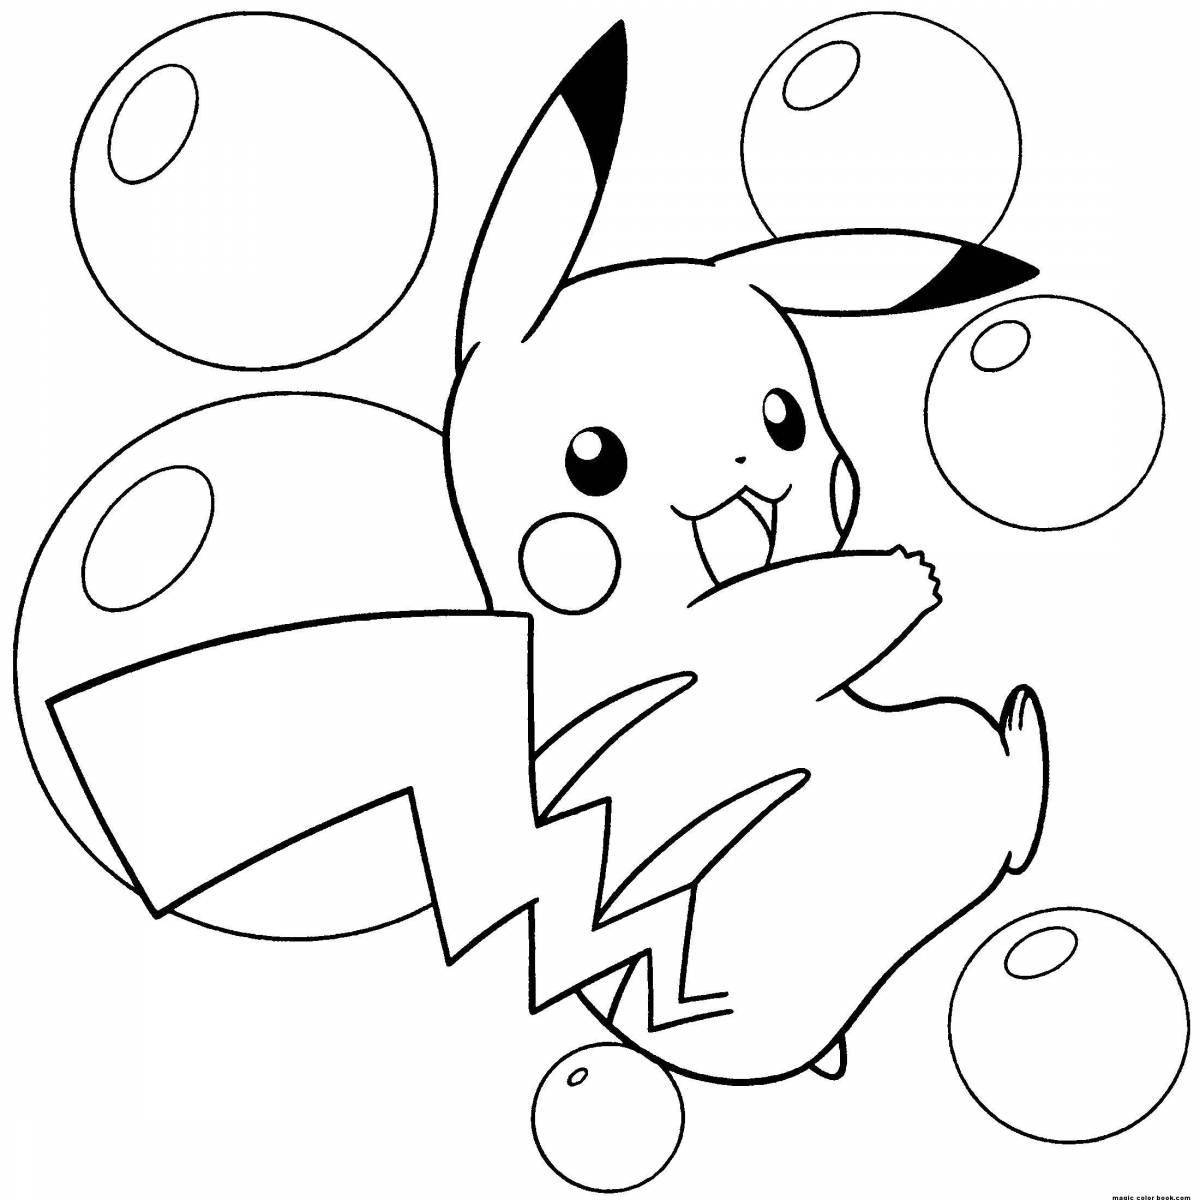 Exciting pikachu number coloring pages